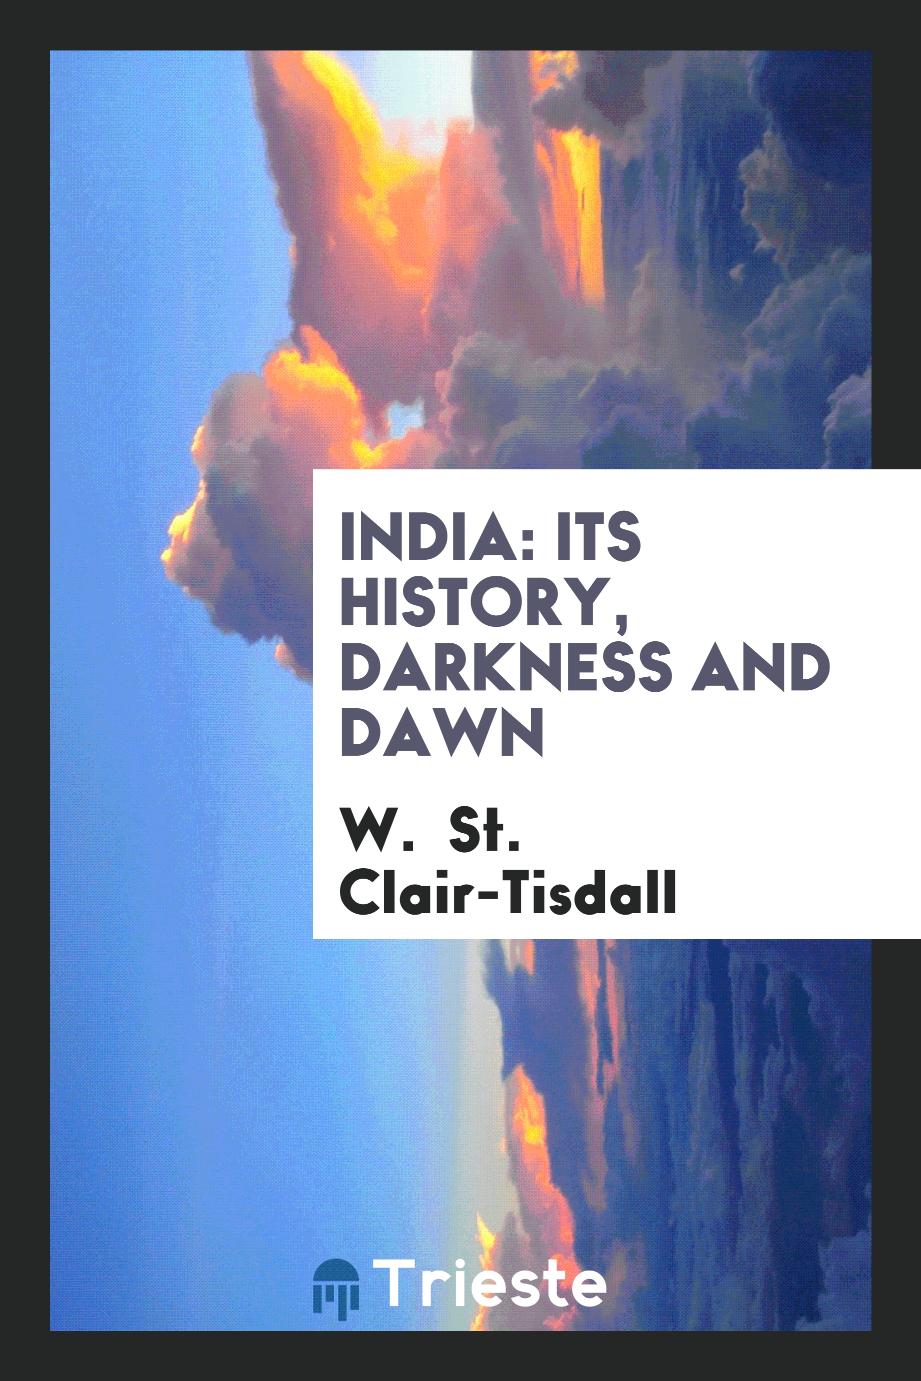 India: Its History, Darkness and Dawn